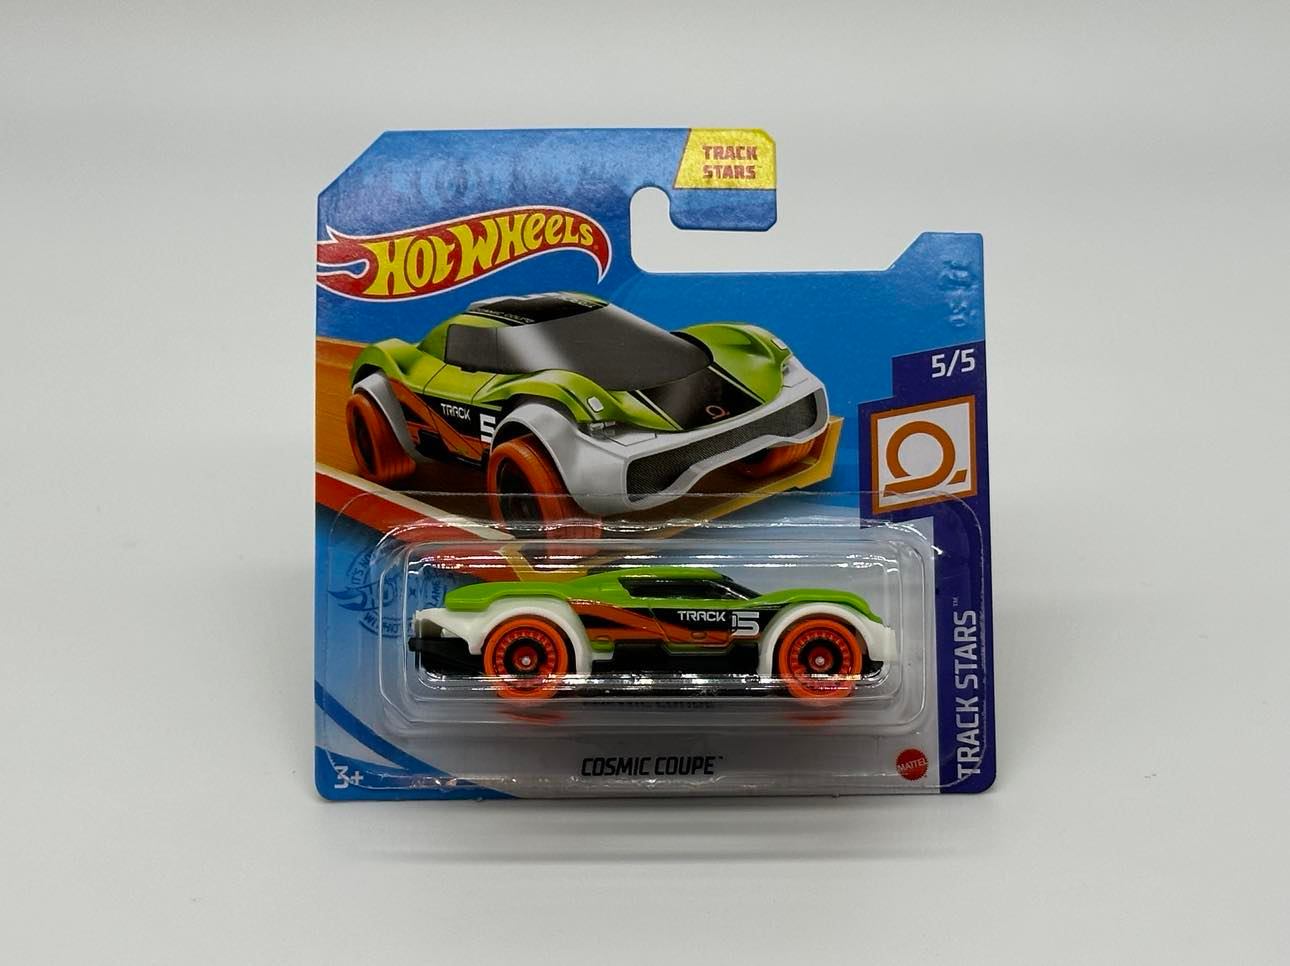 COSMIC COUPE 1/64 HOT WHEELS